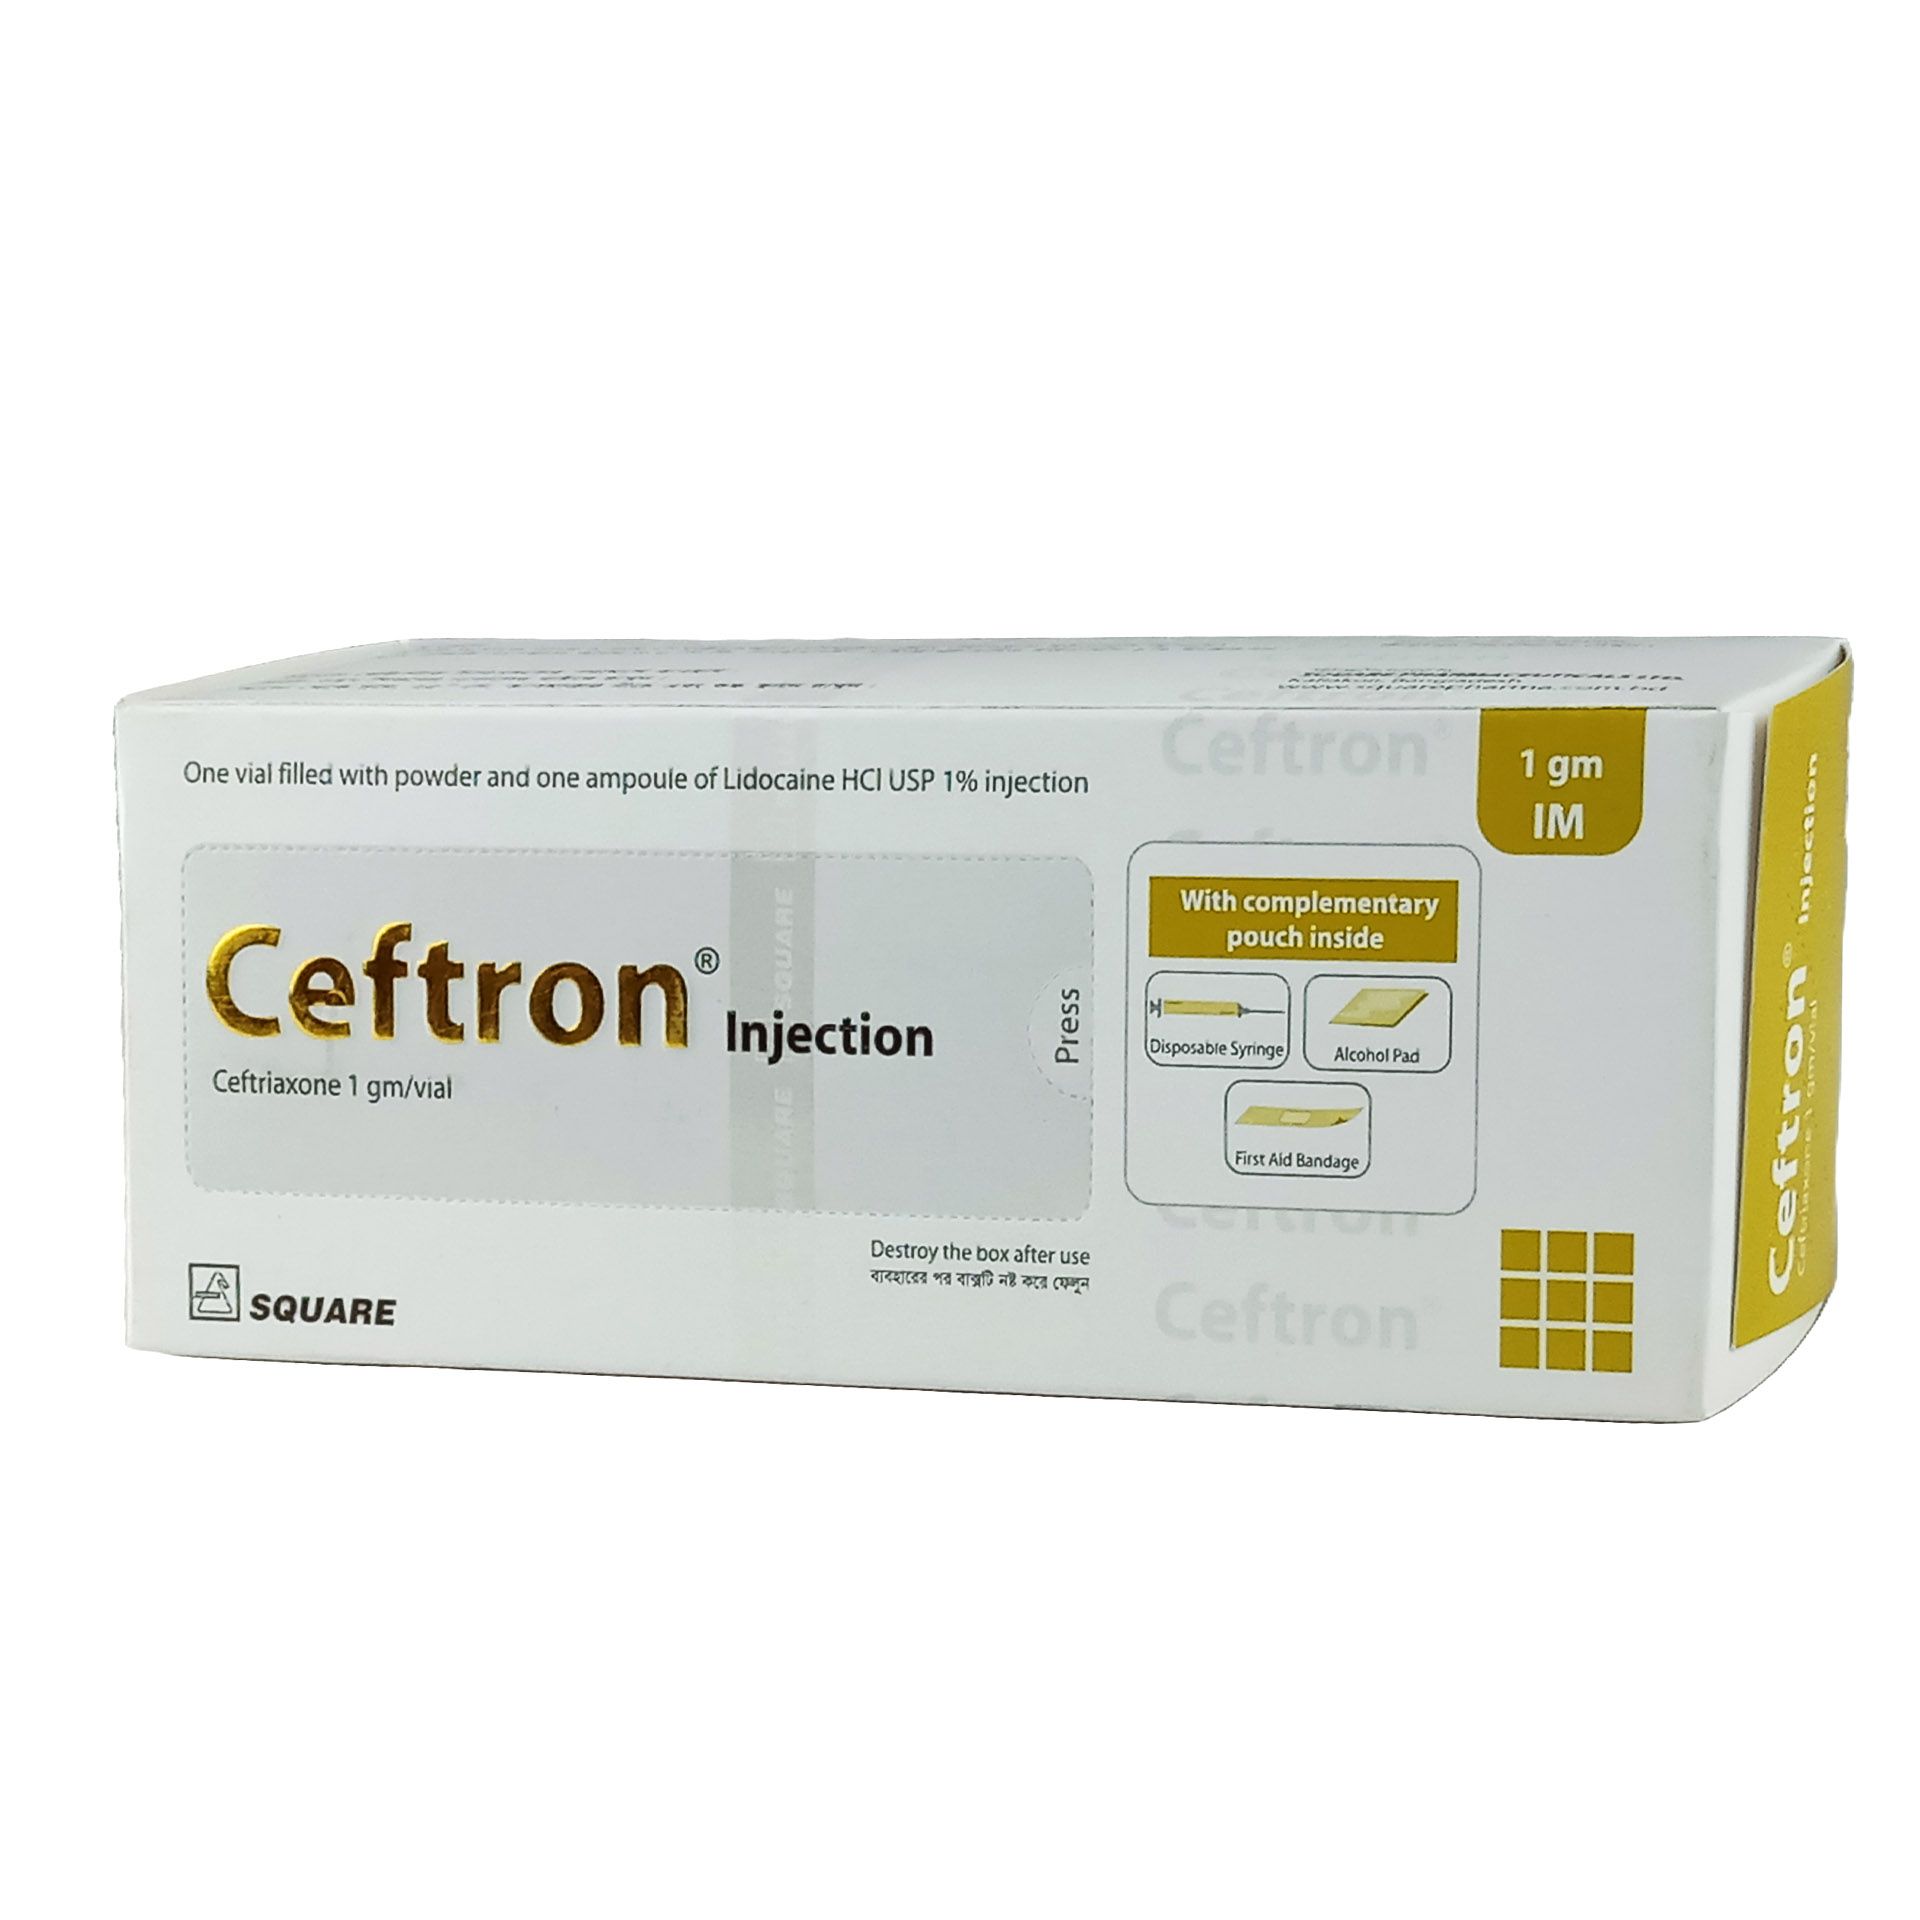 Ceftron 1 IM 1gm/vial Injection